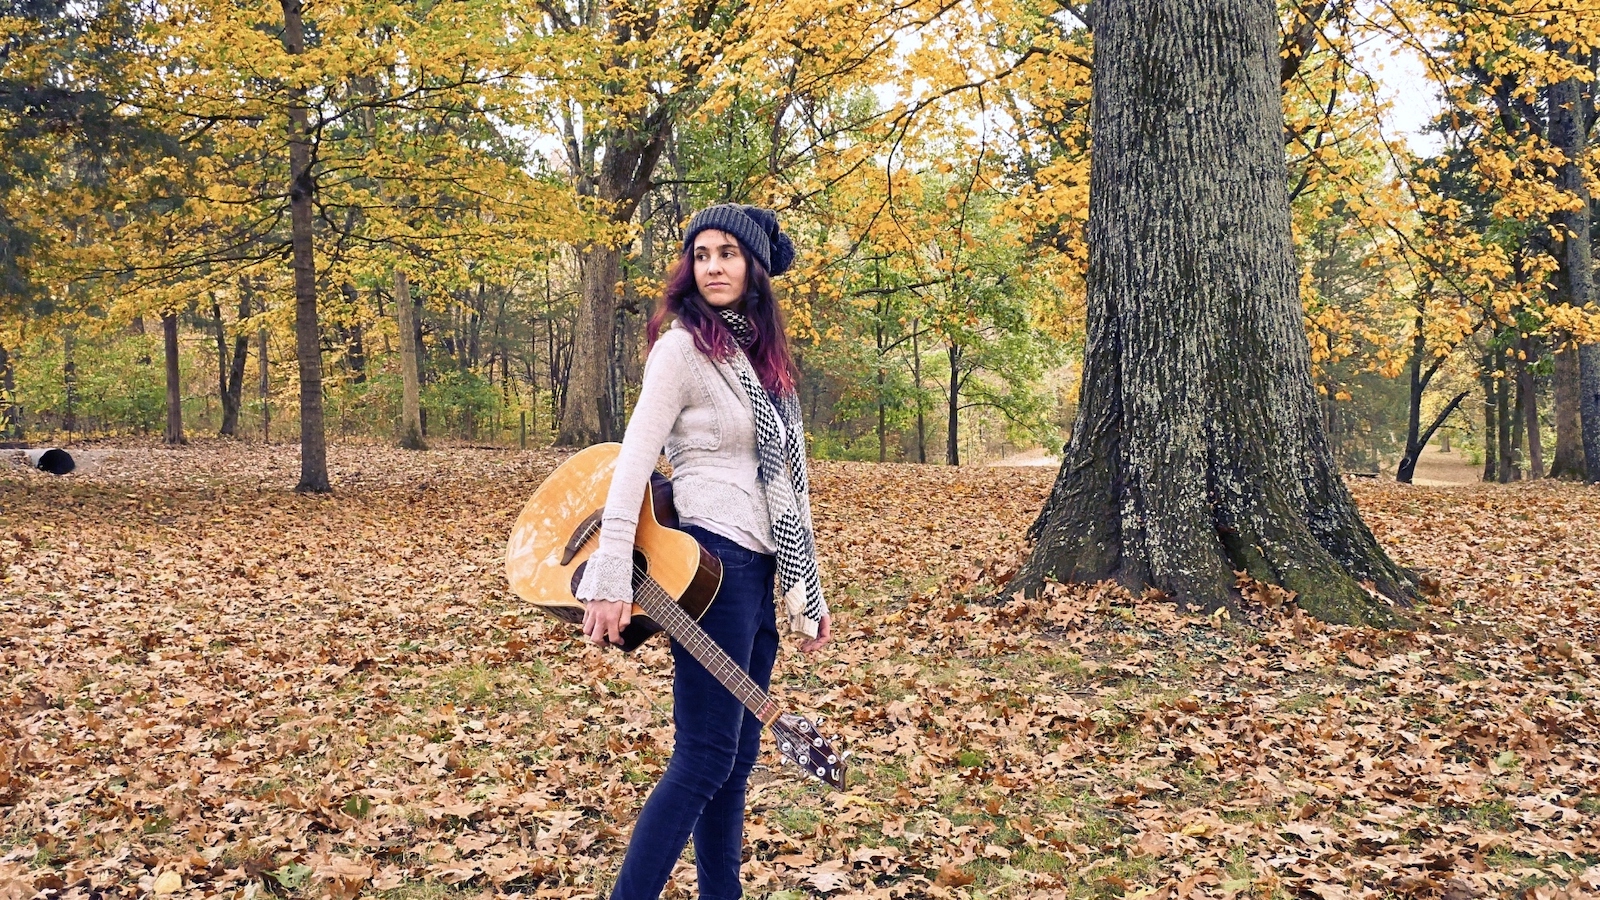 Cassia Dawn, with guitar, fall photo, singer-songwriter, nashville, new single, acoustic, acoustic sessions, acoustic release, new release, new video, new acoustic song, acoustic musicians, Simply song, Simply by cassia dawn, music, musician, artist, singer, songwriter, vocalist